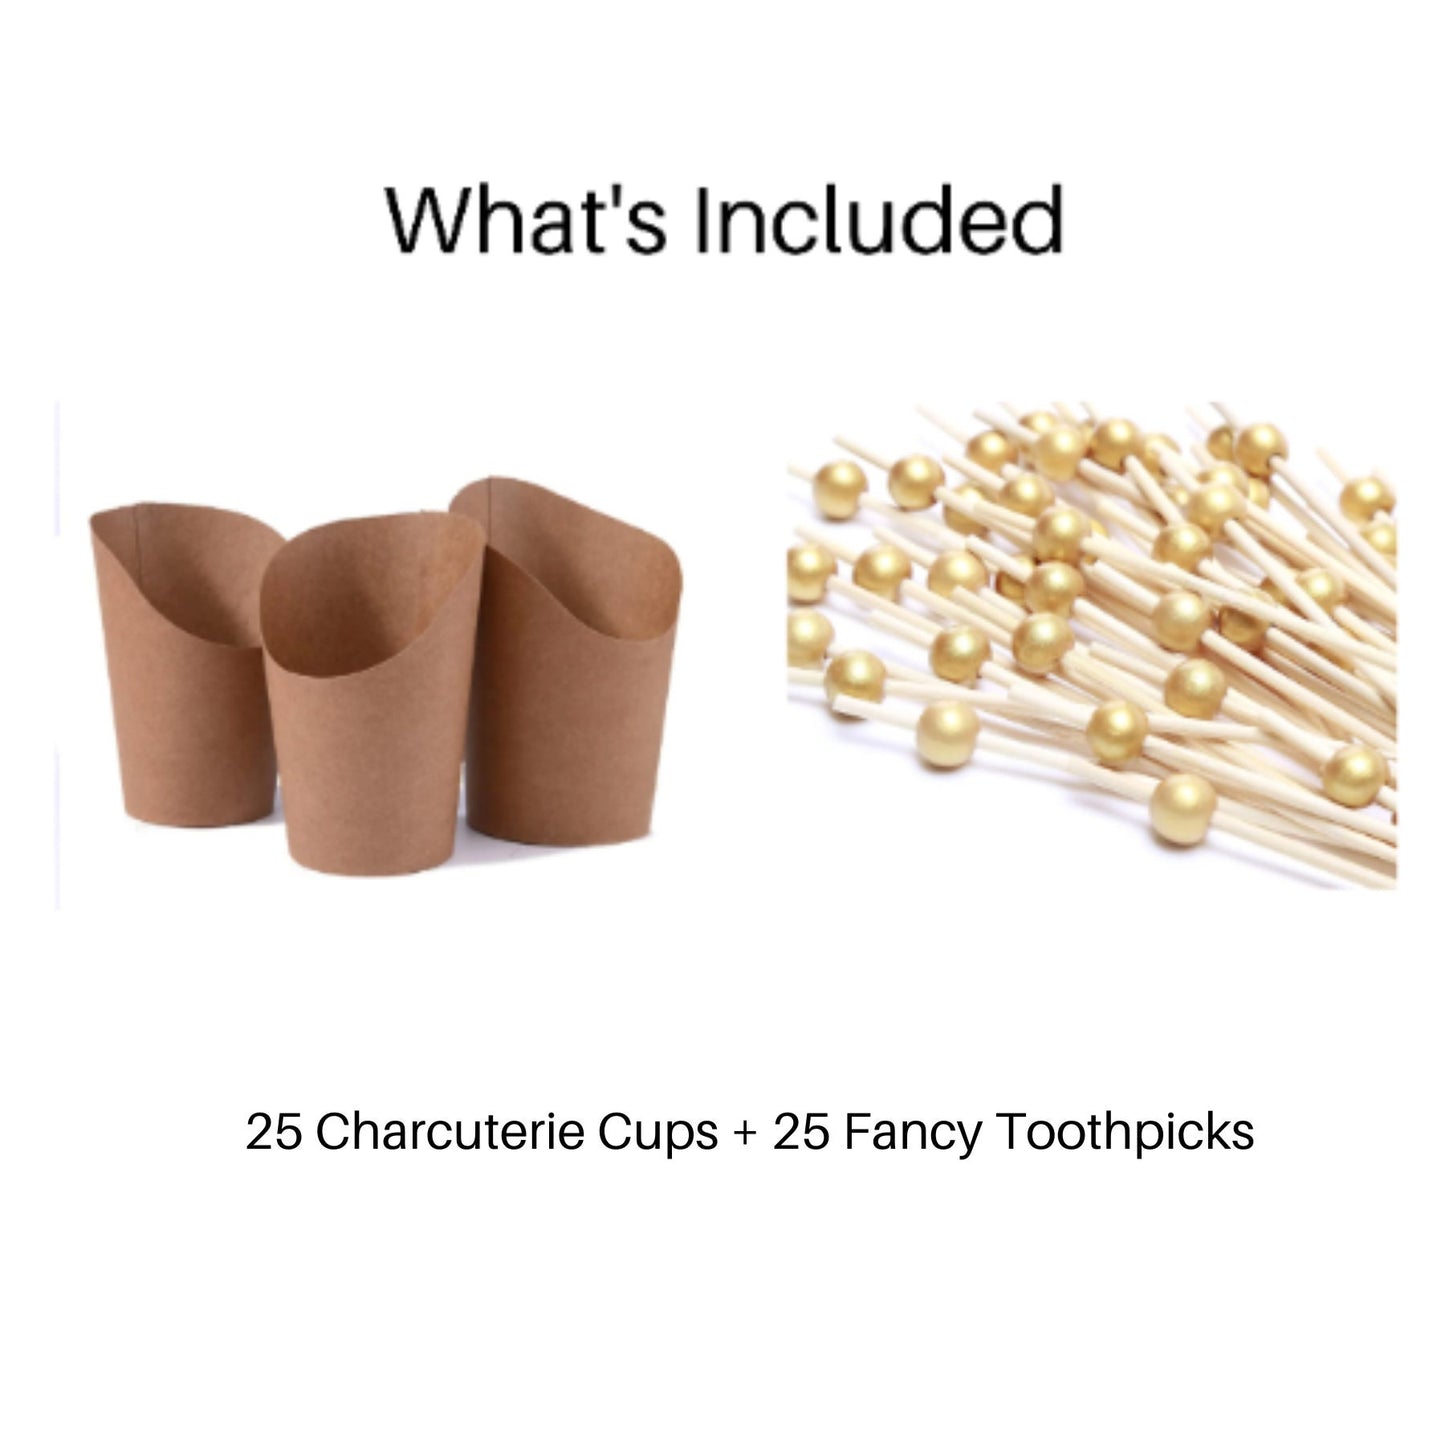 Charcuterie Favor Cups and Toothpicks Set - 25 Cups / 25 Fancy Toothpicks - Individual Charcuterie Board Food Display for Appetizers and Snacks - Catered Event and Wedding Grazing Cup - DIY Charcuterie Cup Ideas